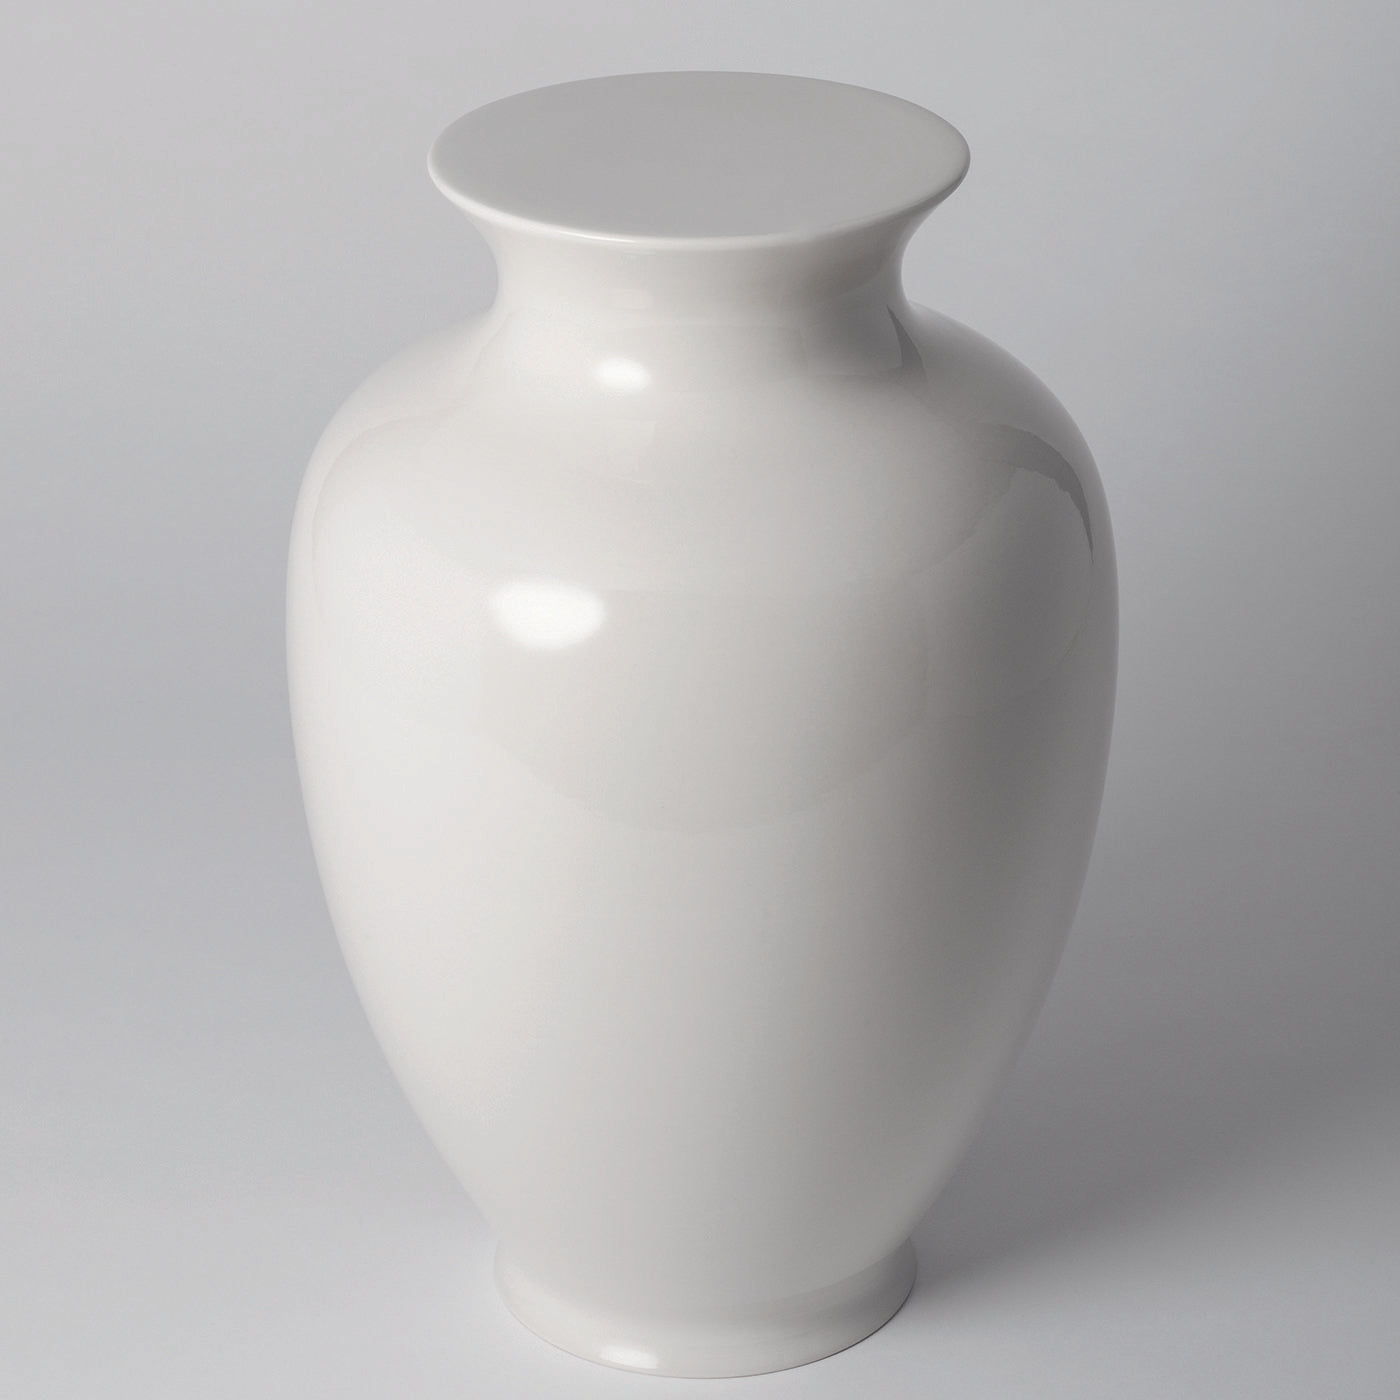 96 Vase by Ron Gilad - Alternative view 1